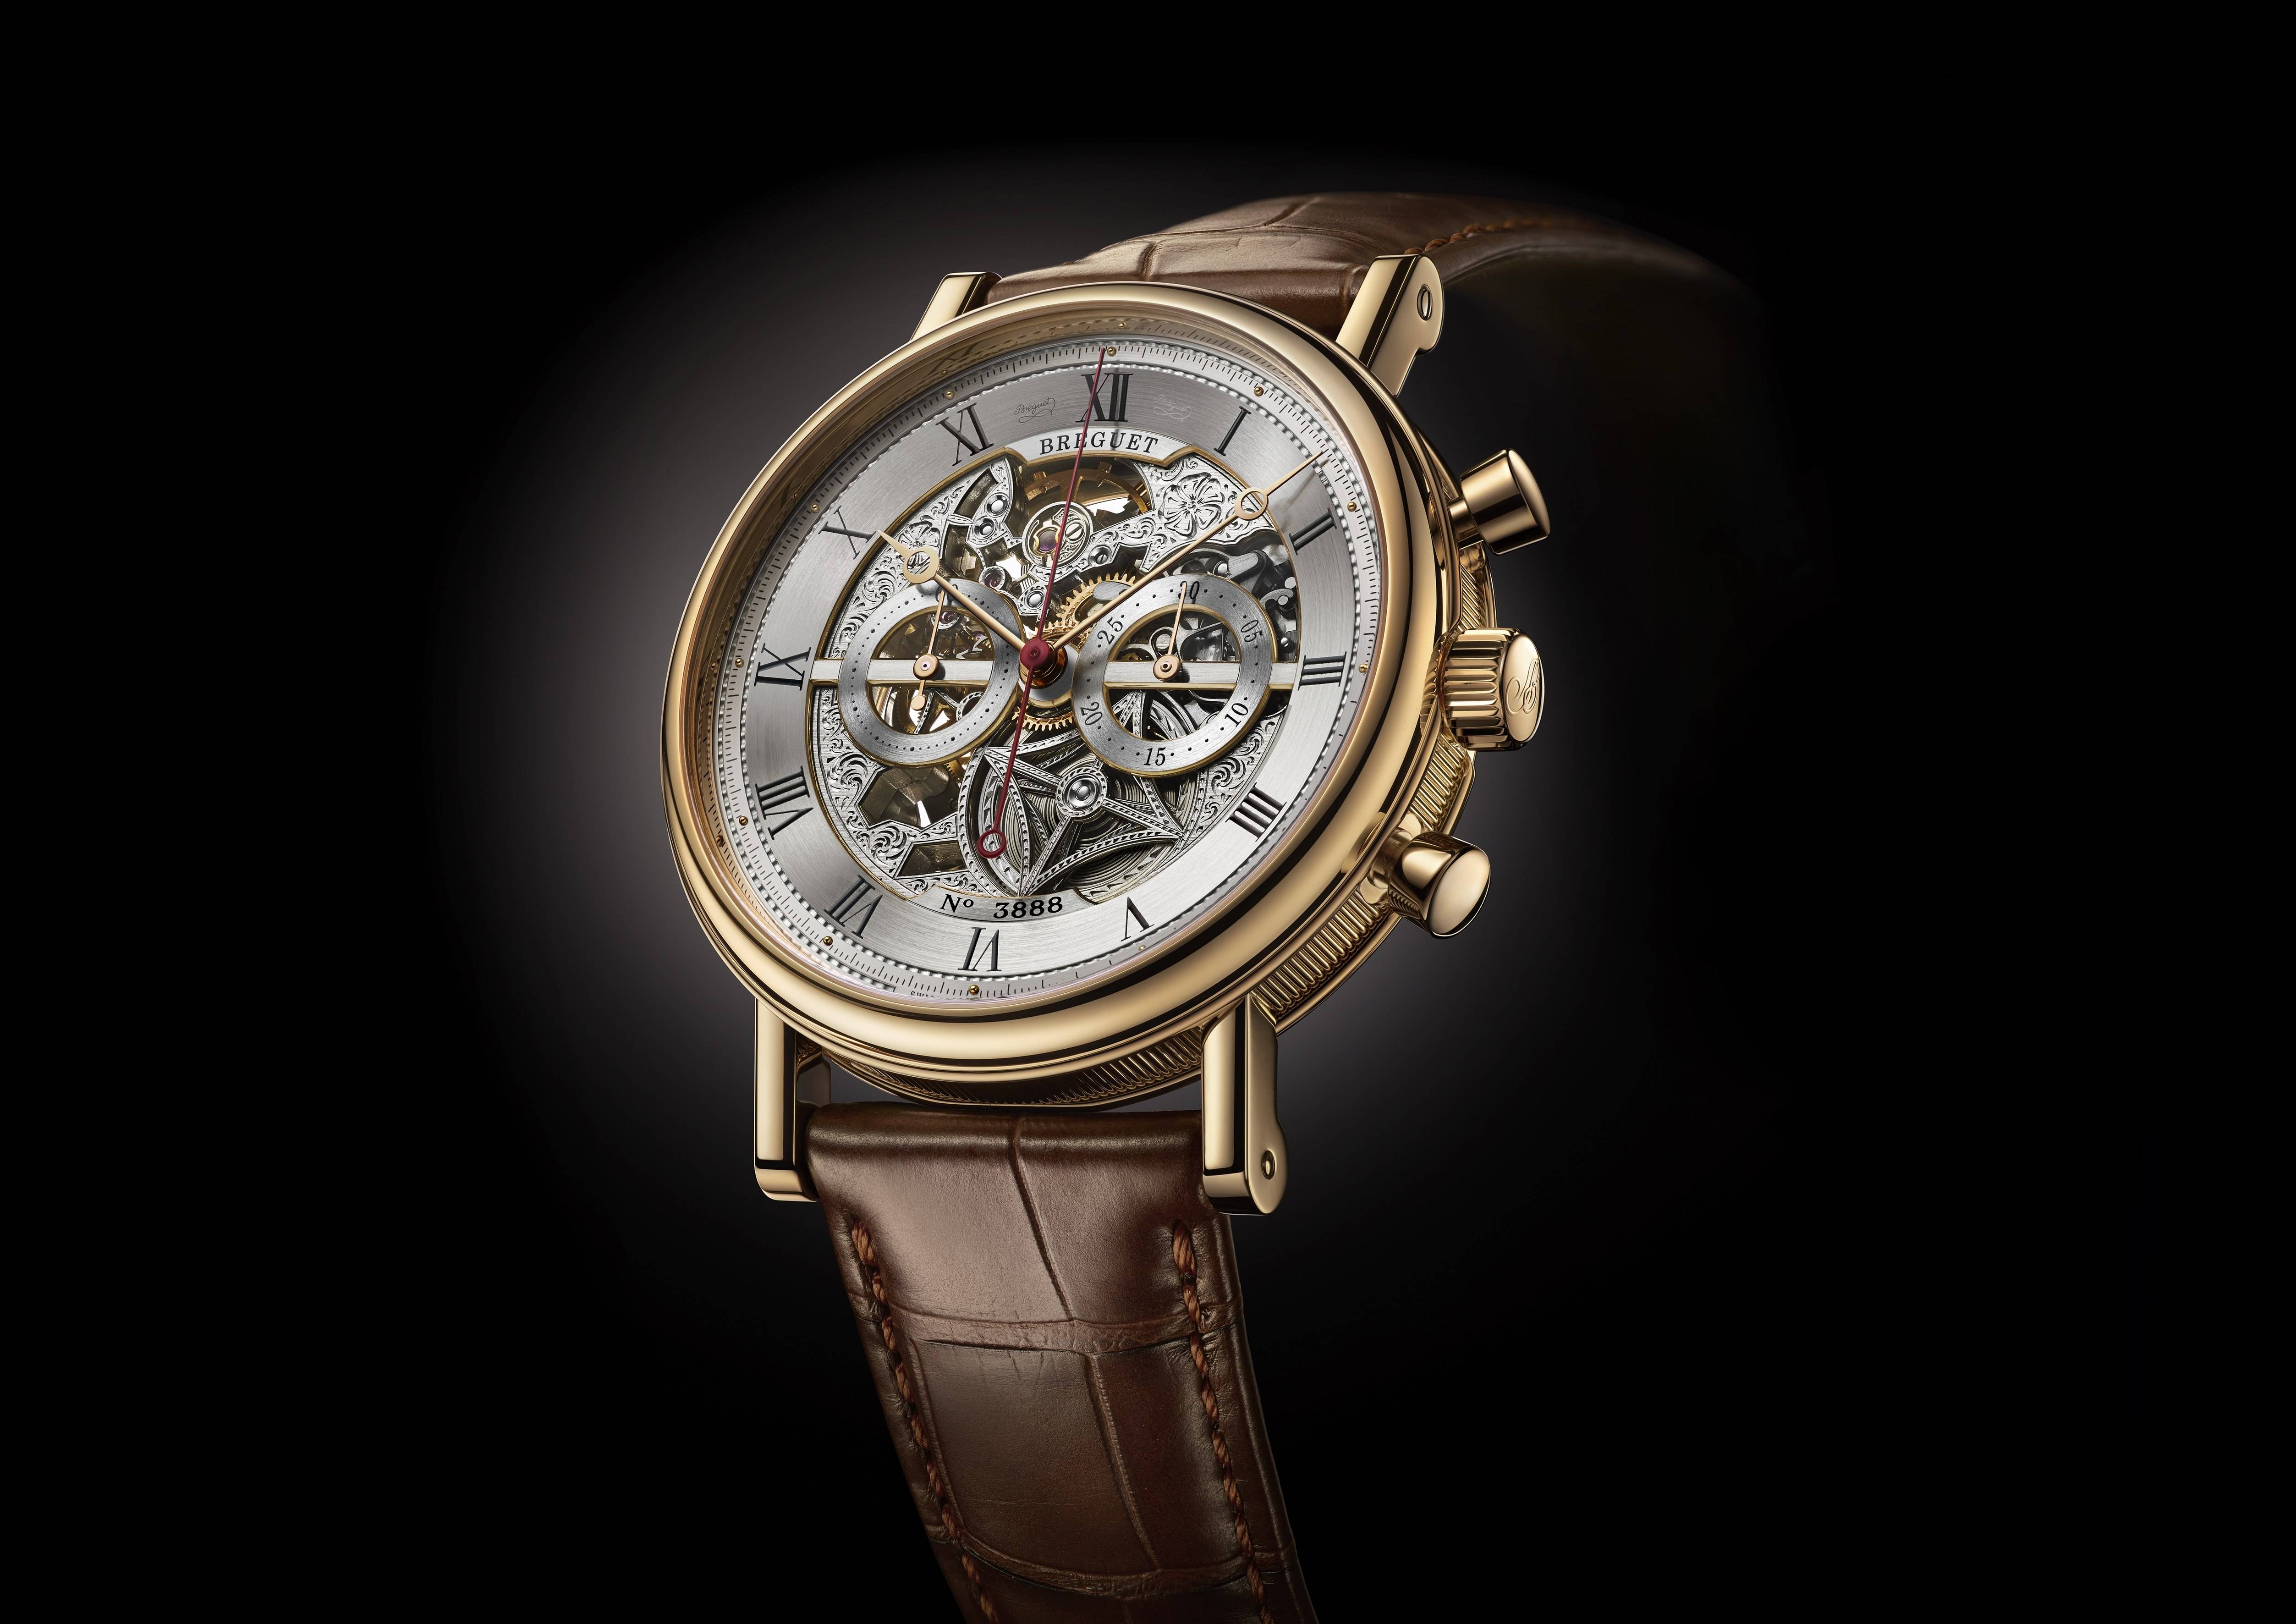 At Auction: The Antiquorum ONLY Auction for Muscular Dystrophy